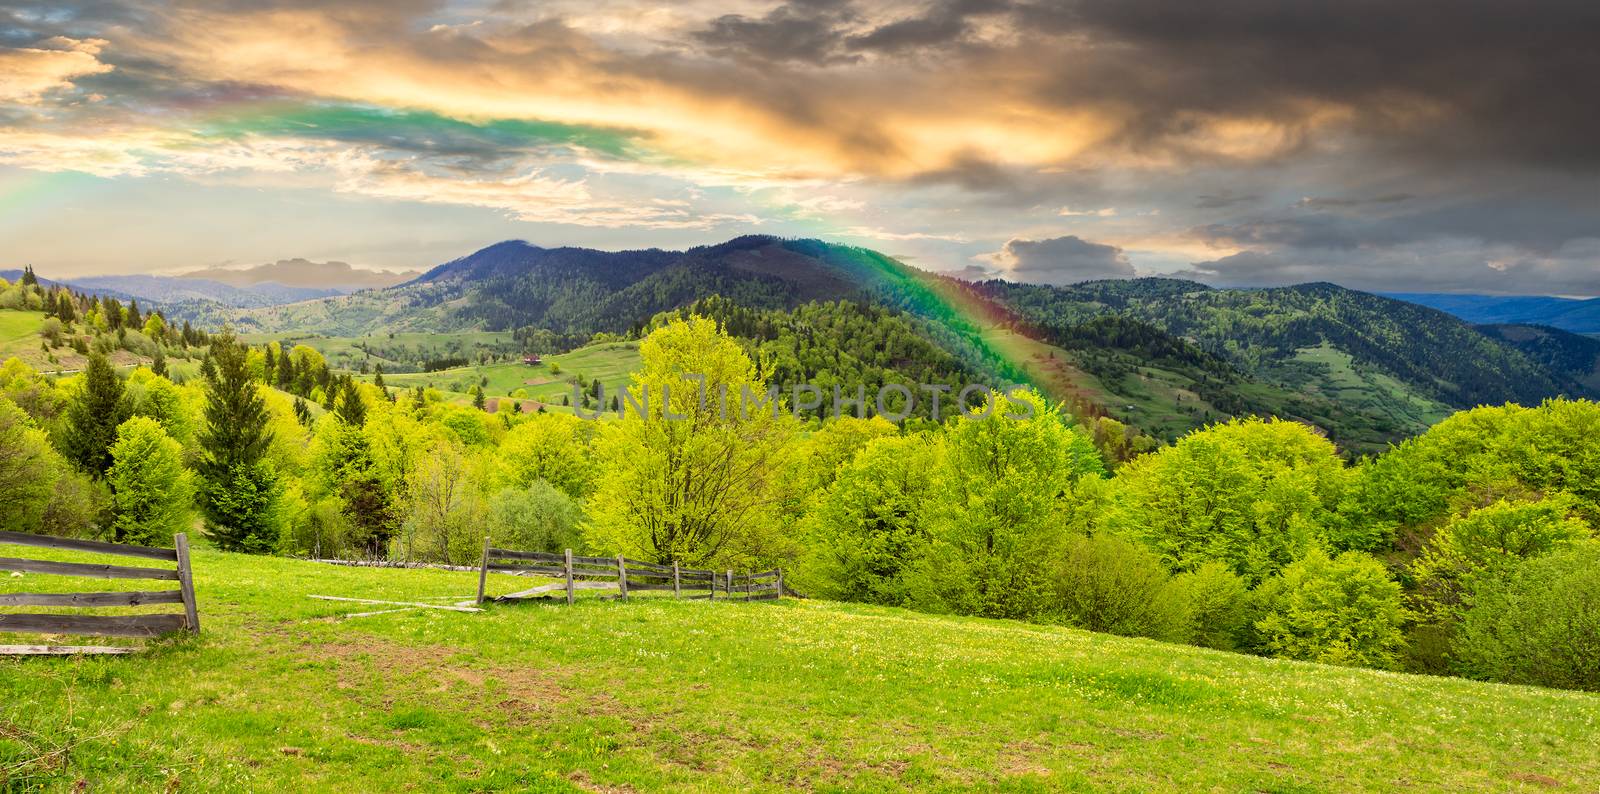 summer panorama landscape. fence near the meadow path on the hillside. forest in fog on the mountain in morning light with rainbow